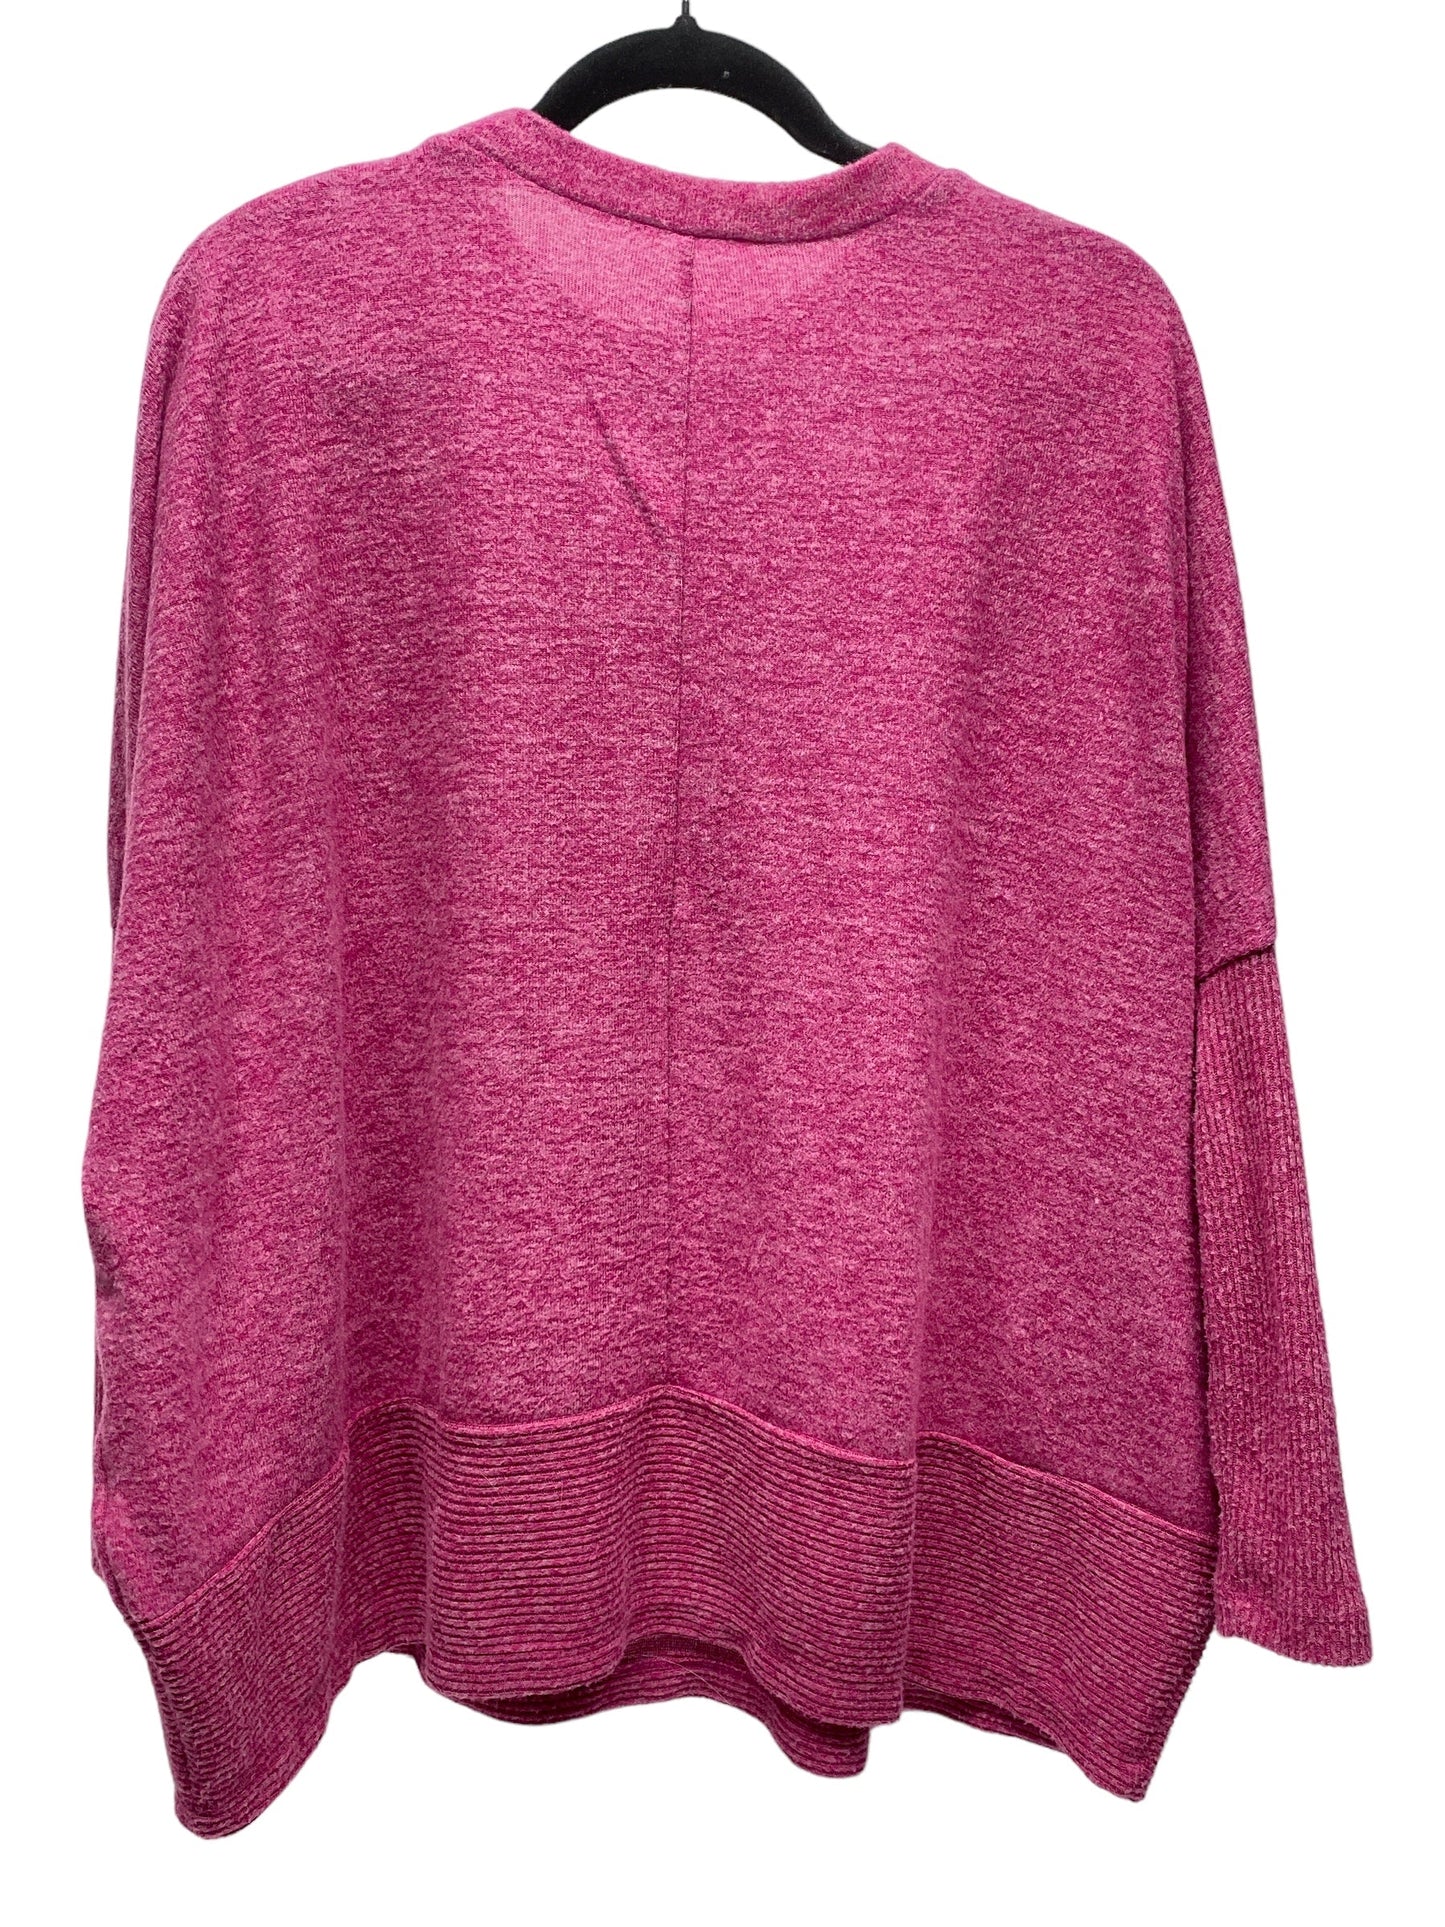 Sweater By Zenana Outfitters  Size: S